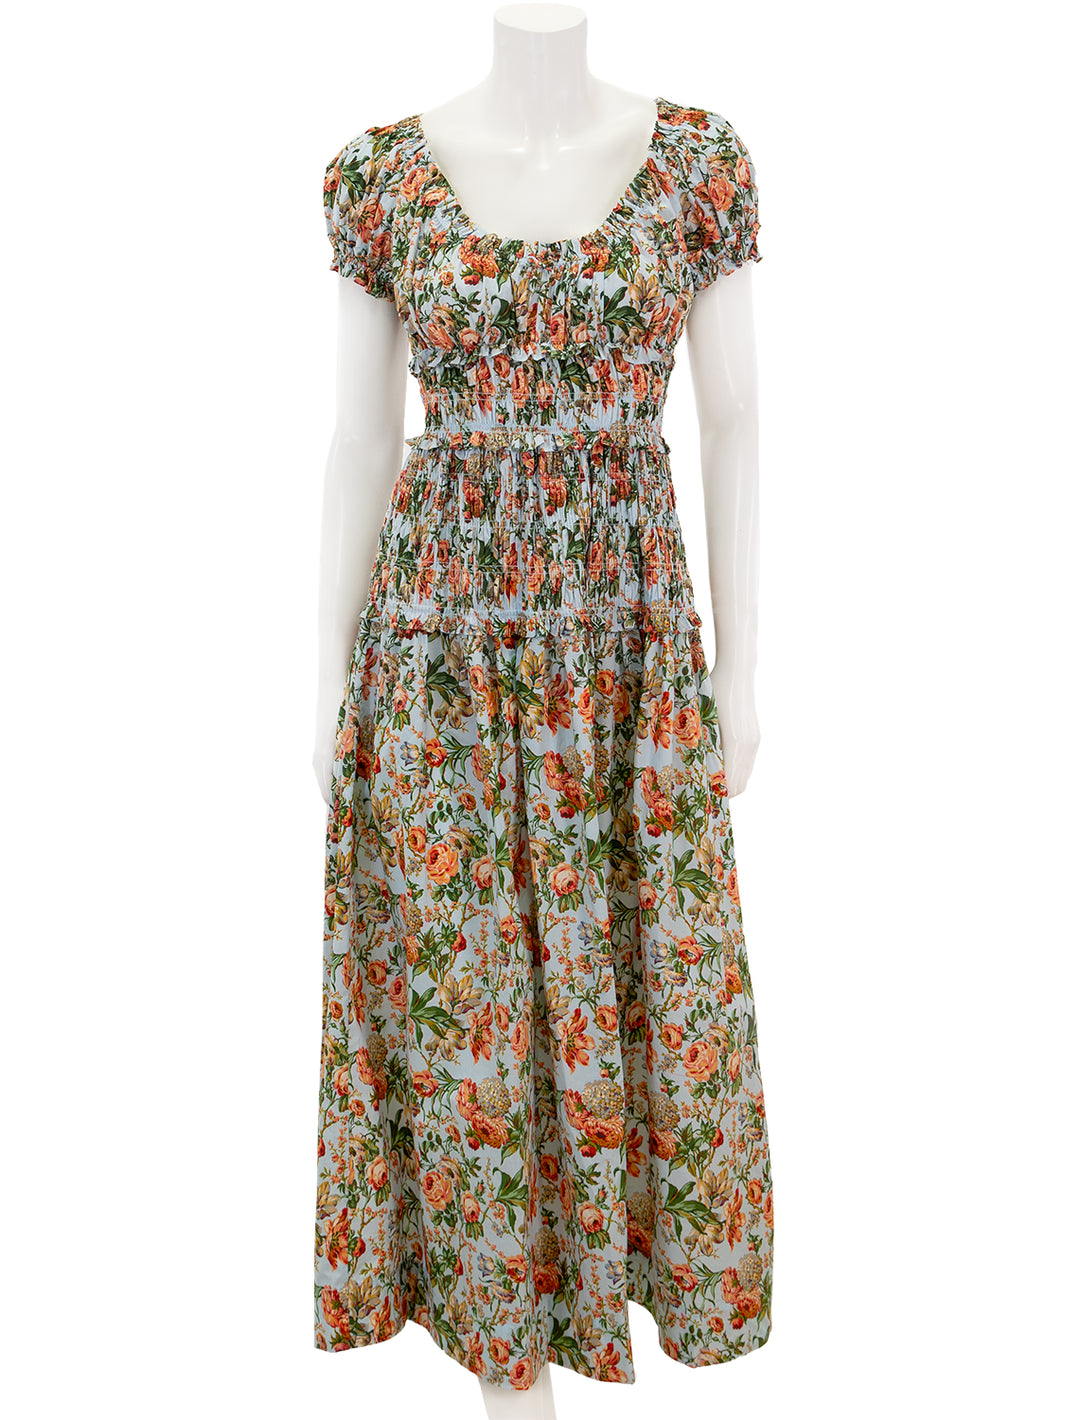 Front view of Doen's leanne dress in calico garden.